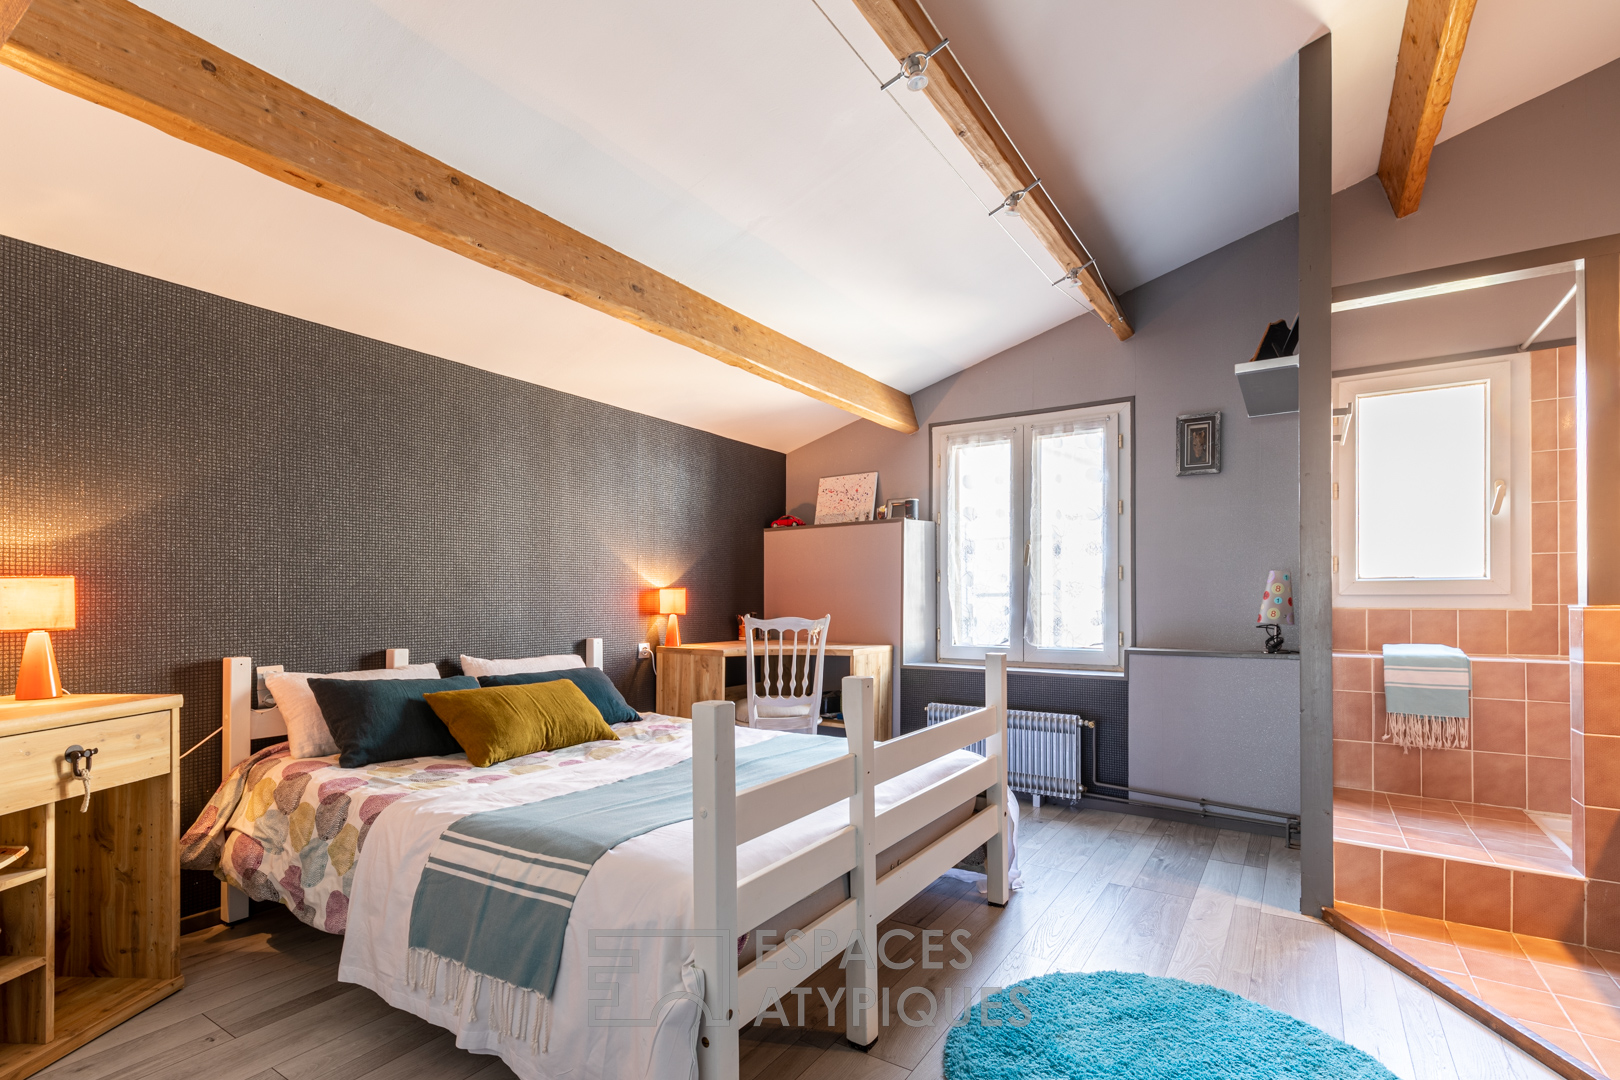 Cozy nest in the heart of Marennes